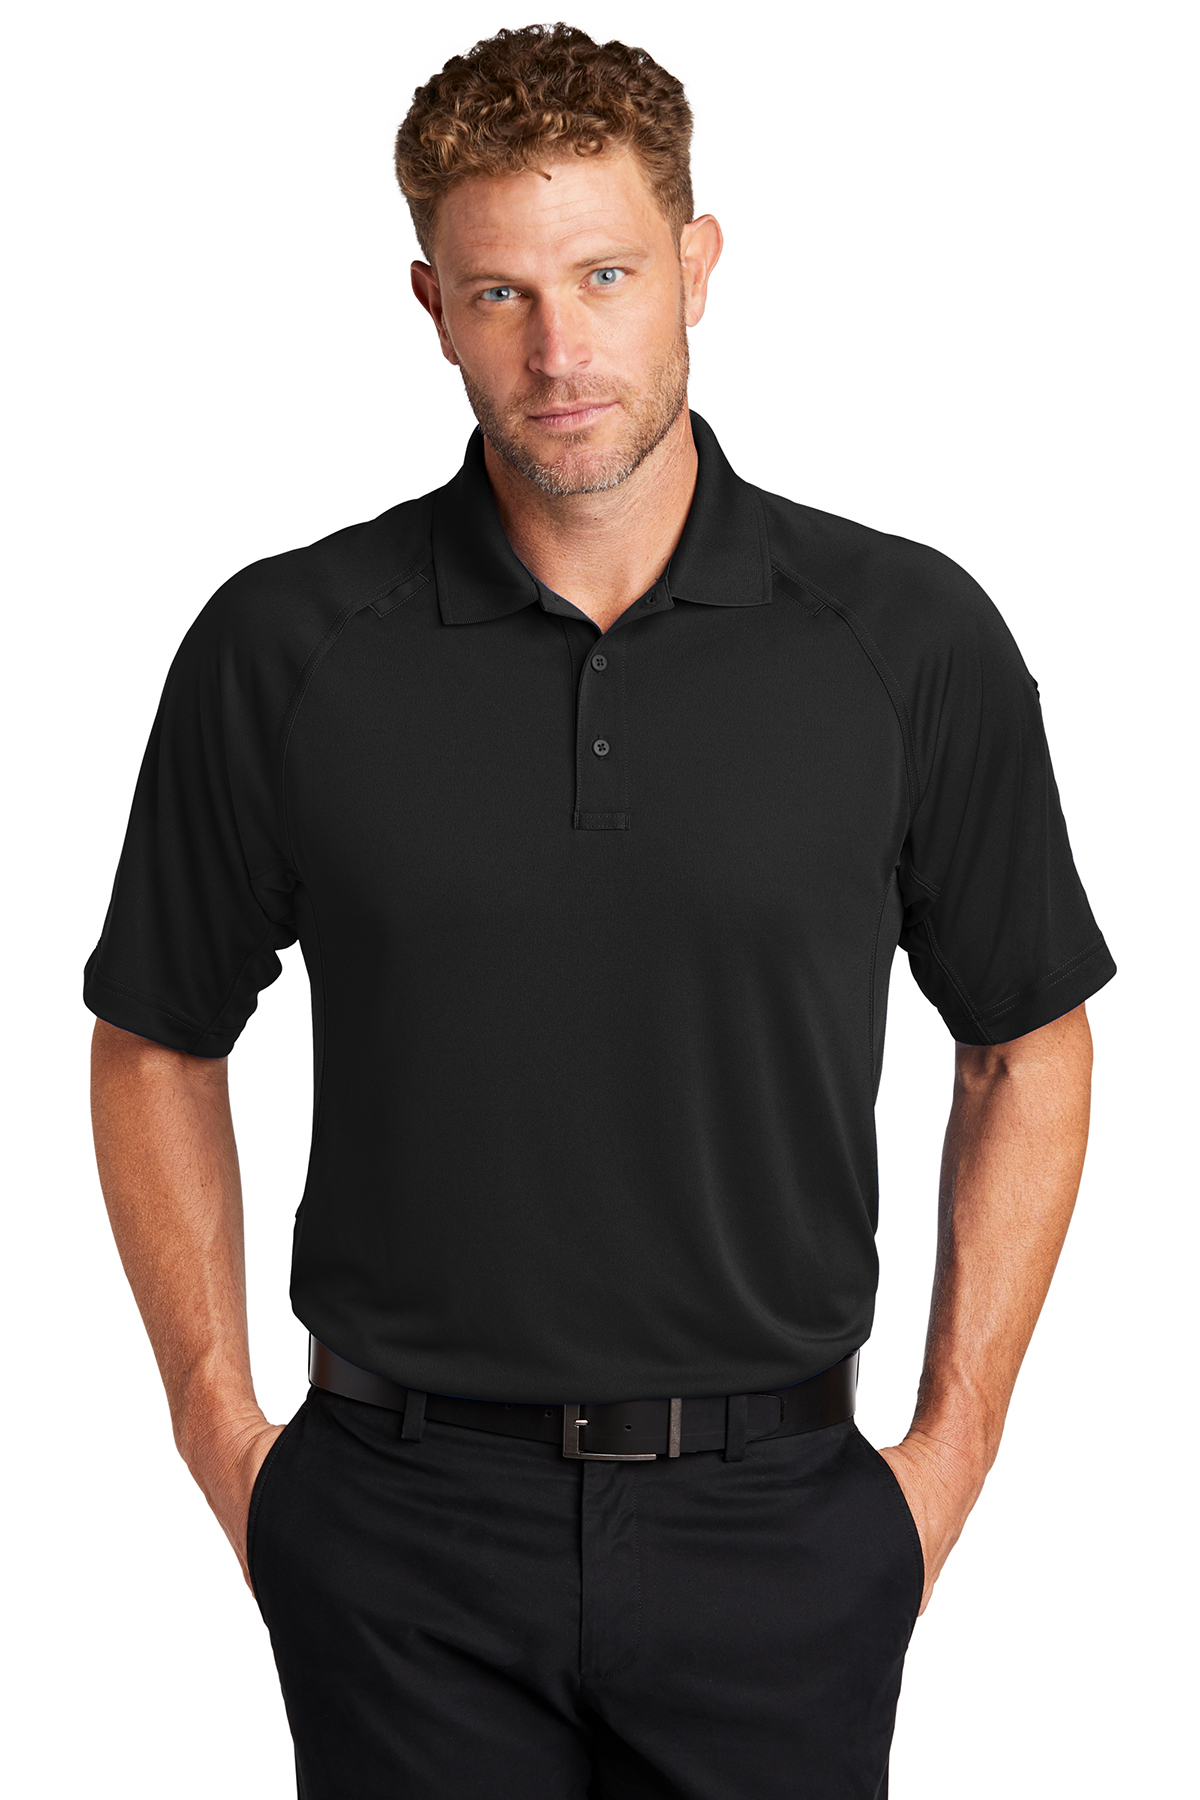 CornerStone Select Lightweight Snag-Proof Tactical Polo | Product | SanMar